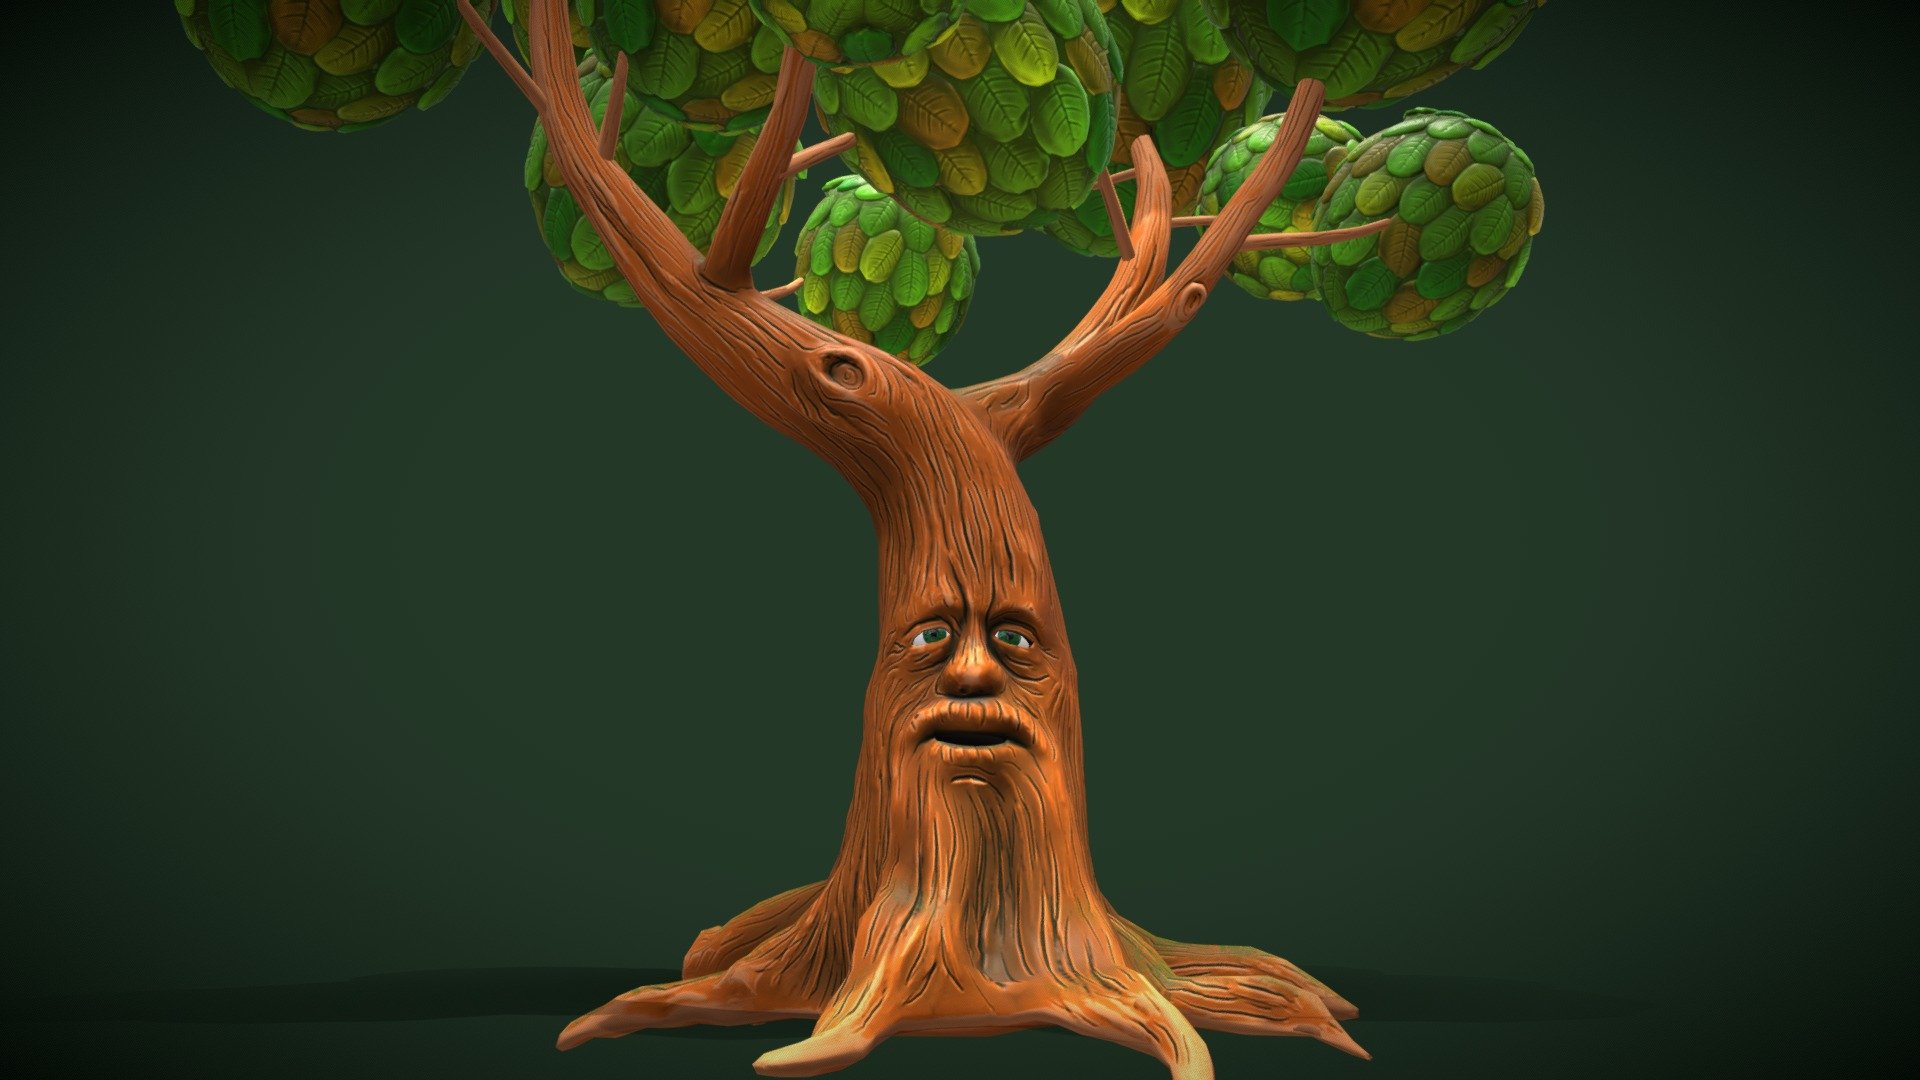 The 3D Cartoon Talking Tree (RIGGED) model is a versatile asset, suitable for both offline and real-time rendering. Created using 3ds Max, the model is textured with 3d-coat. The character is suitable for a range of animation projects, such as kids content and illustrations, as well as real-time applications with PBR materials.

Watch rig demo youtube video!

Inspired by the talking trees found in fantasy stories and mythology, this particular character is an original creation of the author. Any resemblance to existing characters, or real persons, living or dead, is entirely coincidental.

Included formats:  FBX, 3ds Max 2022, Unity package 2020.3

BONUS! Unity package inlcudes a working demo scene testing the two animations: Idle and Generic talking 3d model